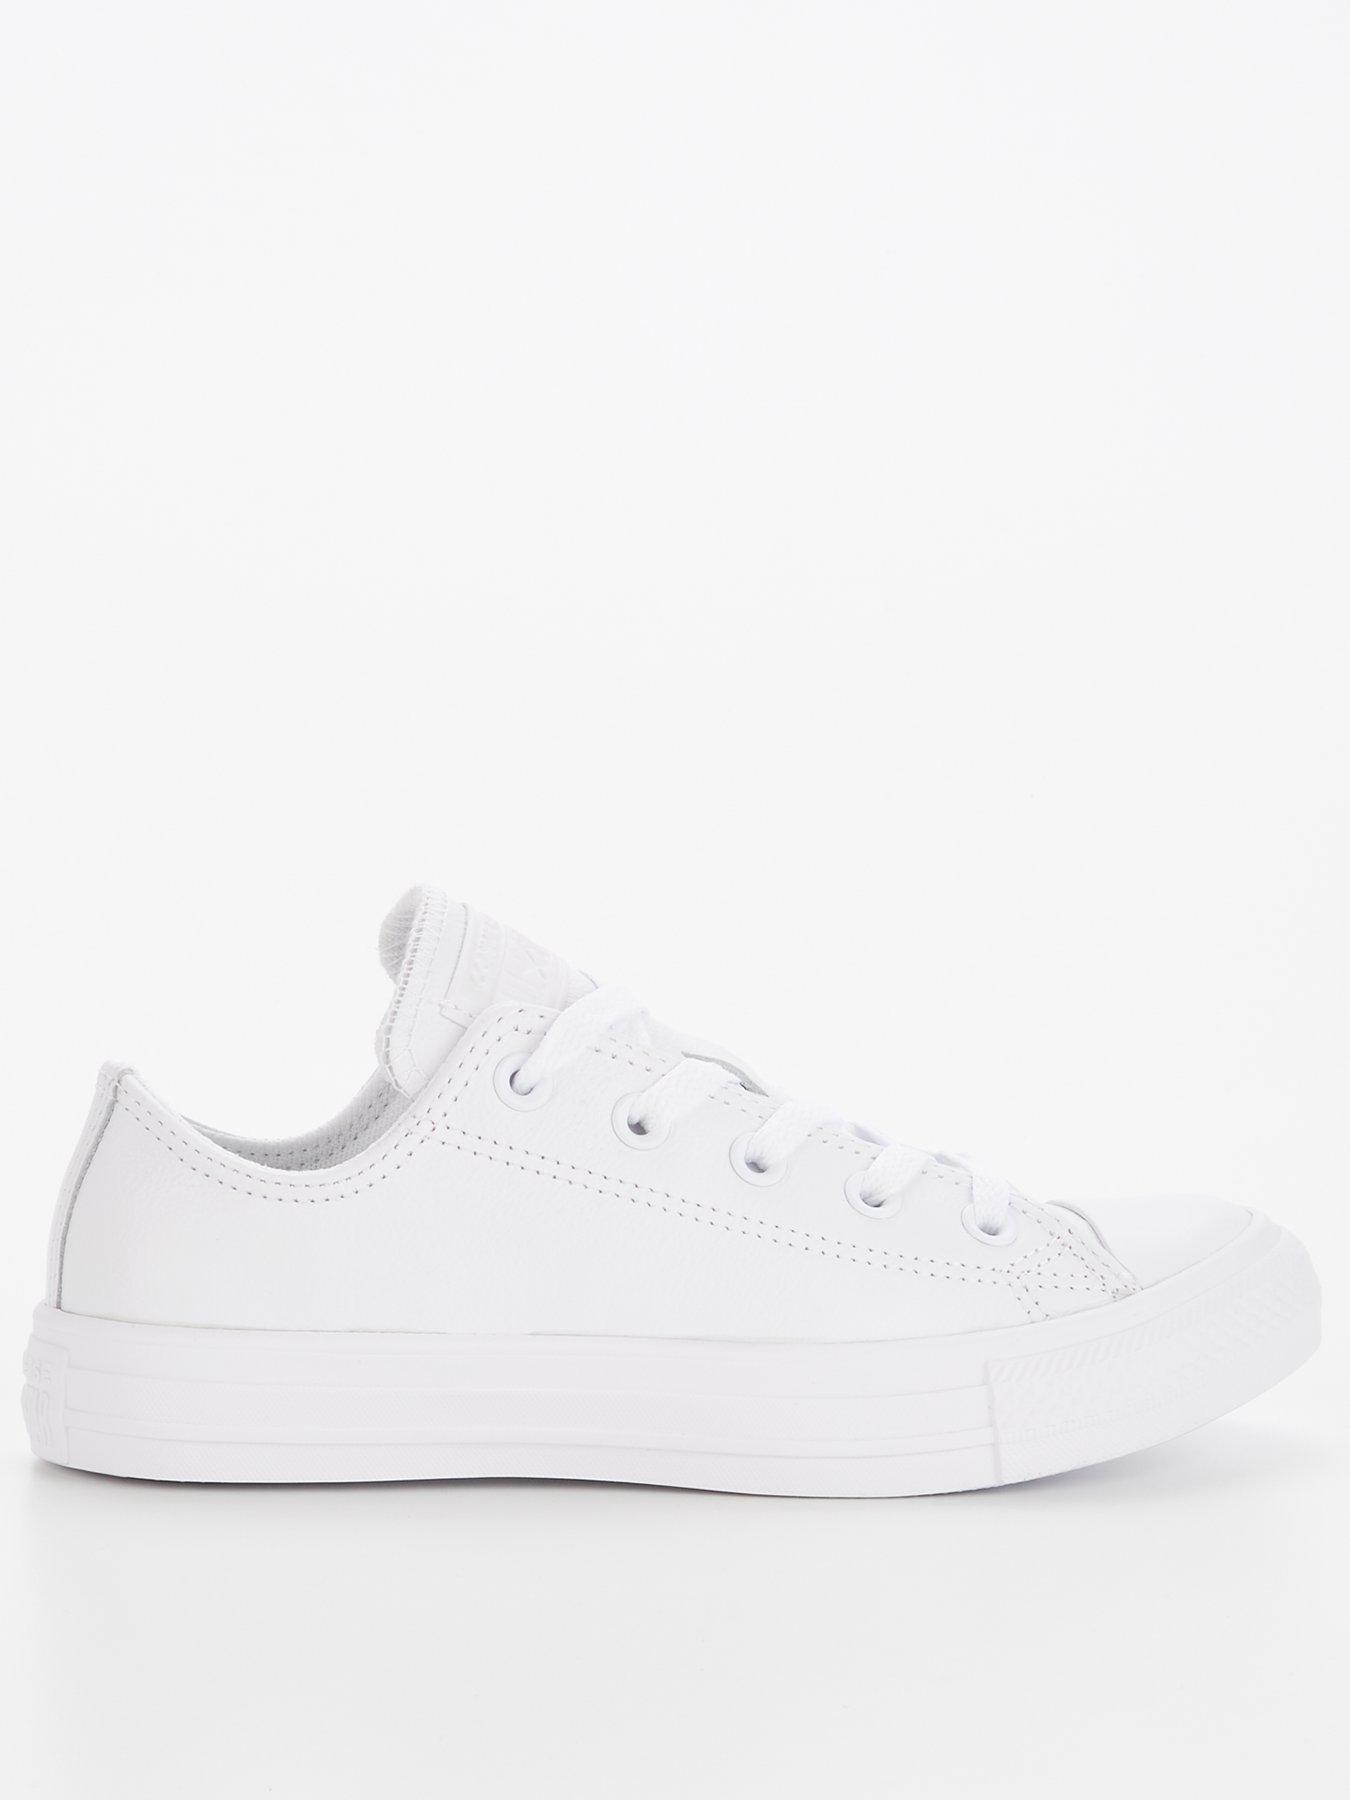 Converse Chuck All Star Leather Ox - White/White | littlewoods.com